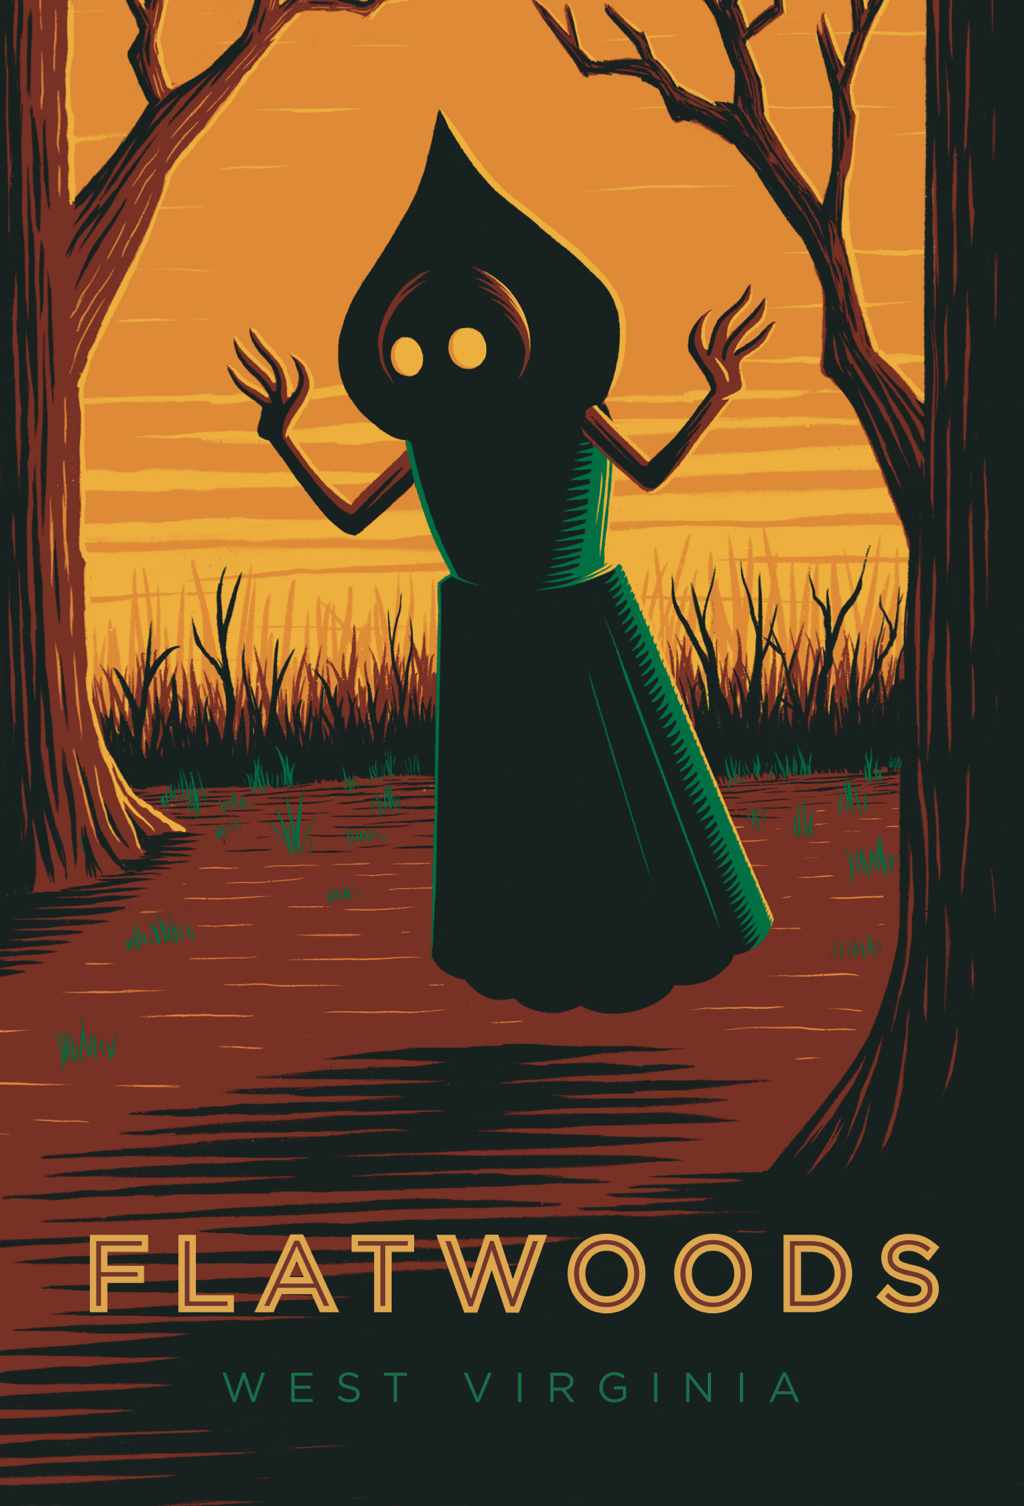 Flatwoods West Virginia travel poster print 18x27